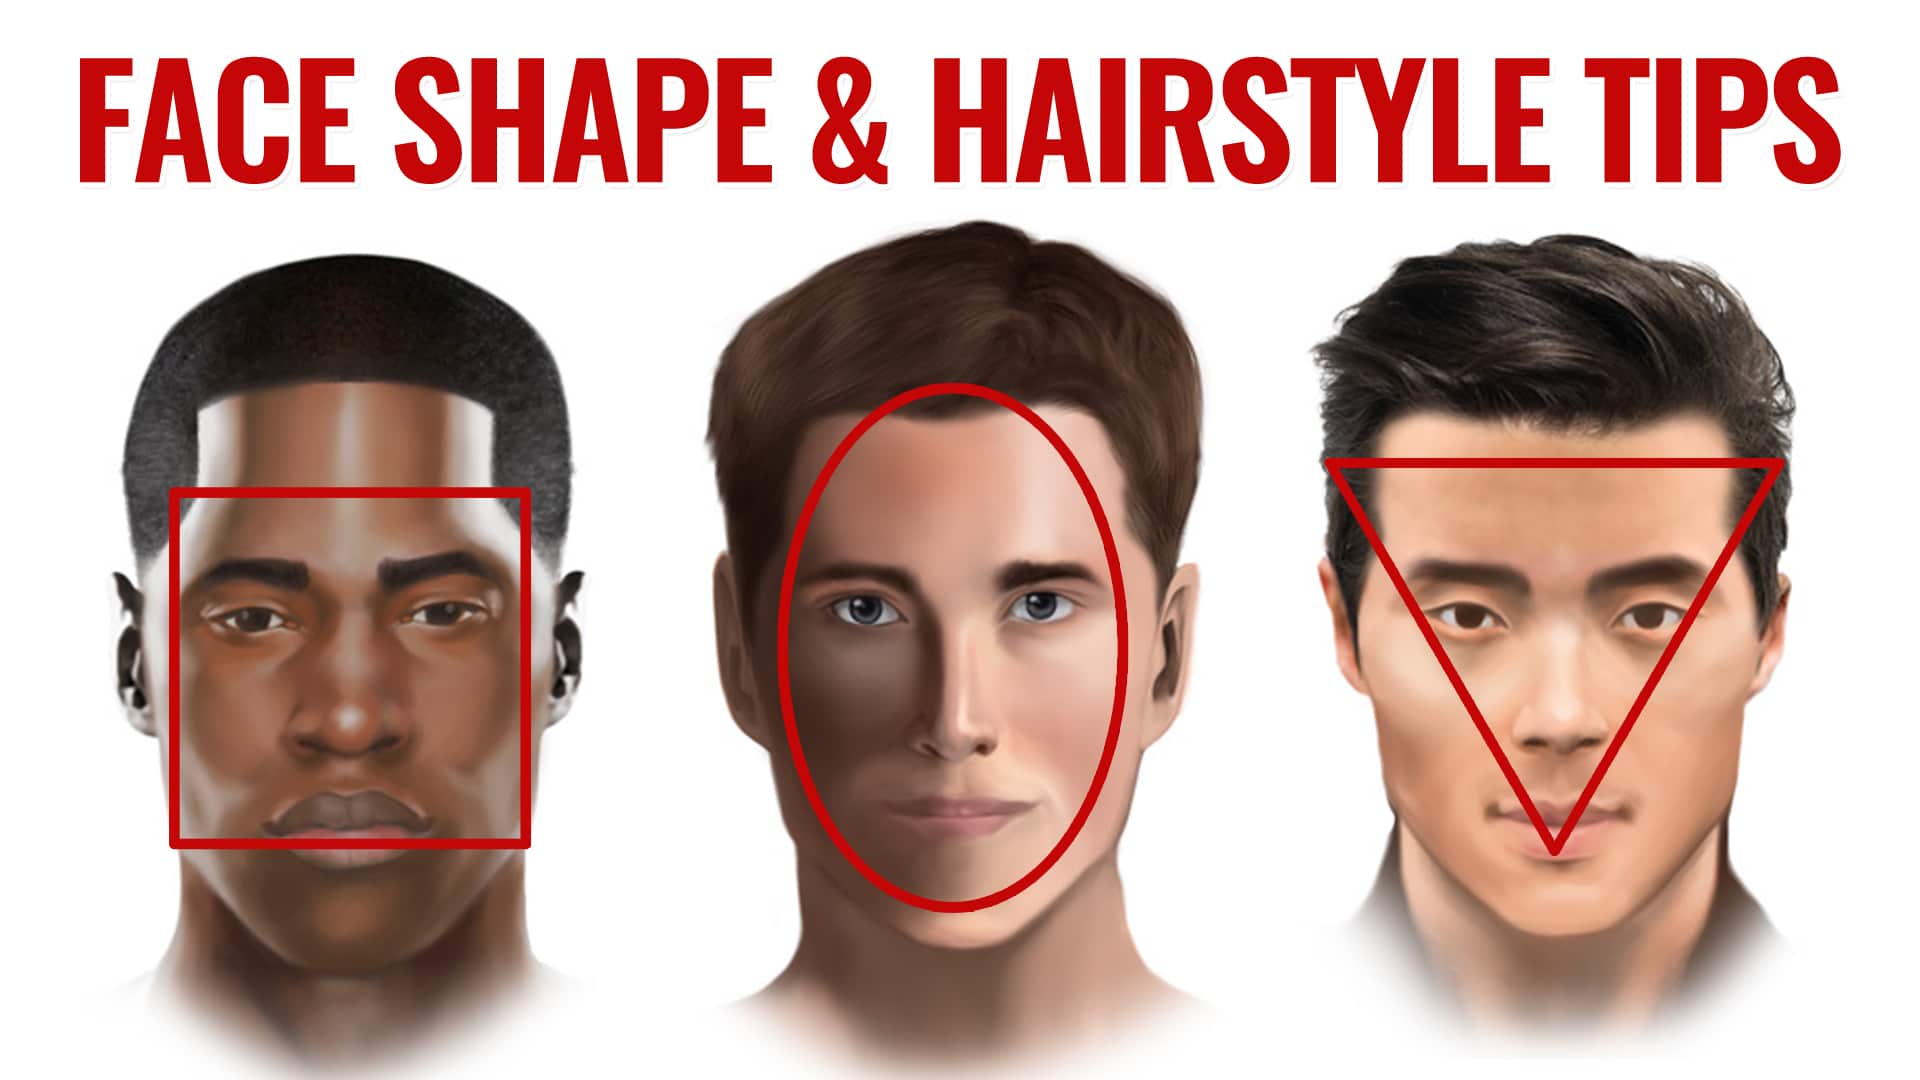 How to Choose The Best Hairstyle For Your Face Shape | Know Your Face Shape  & The Right Hairstyle - ILHT Dubai